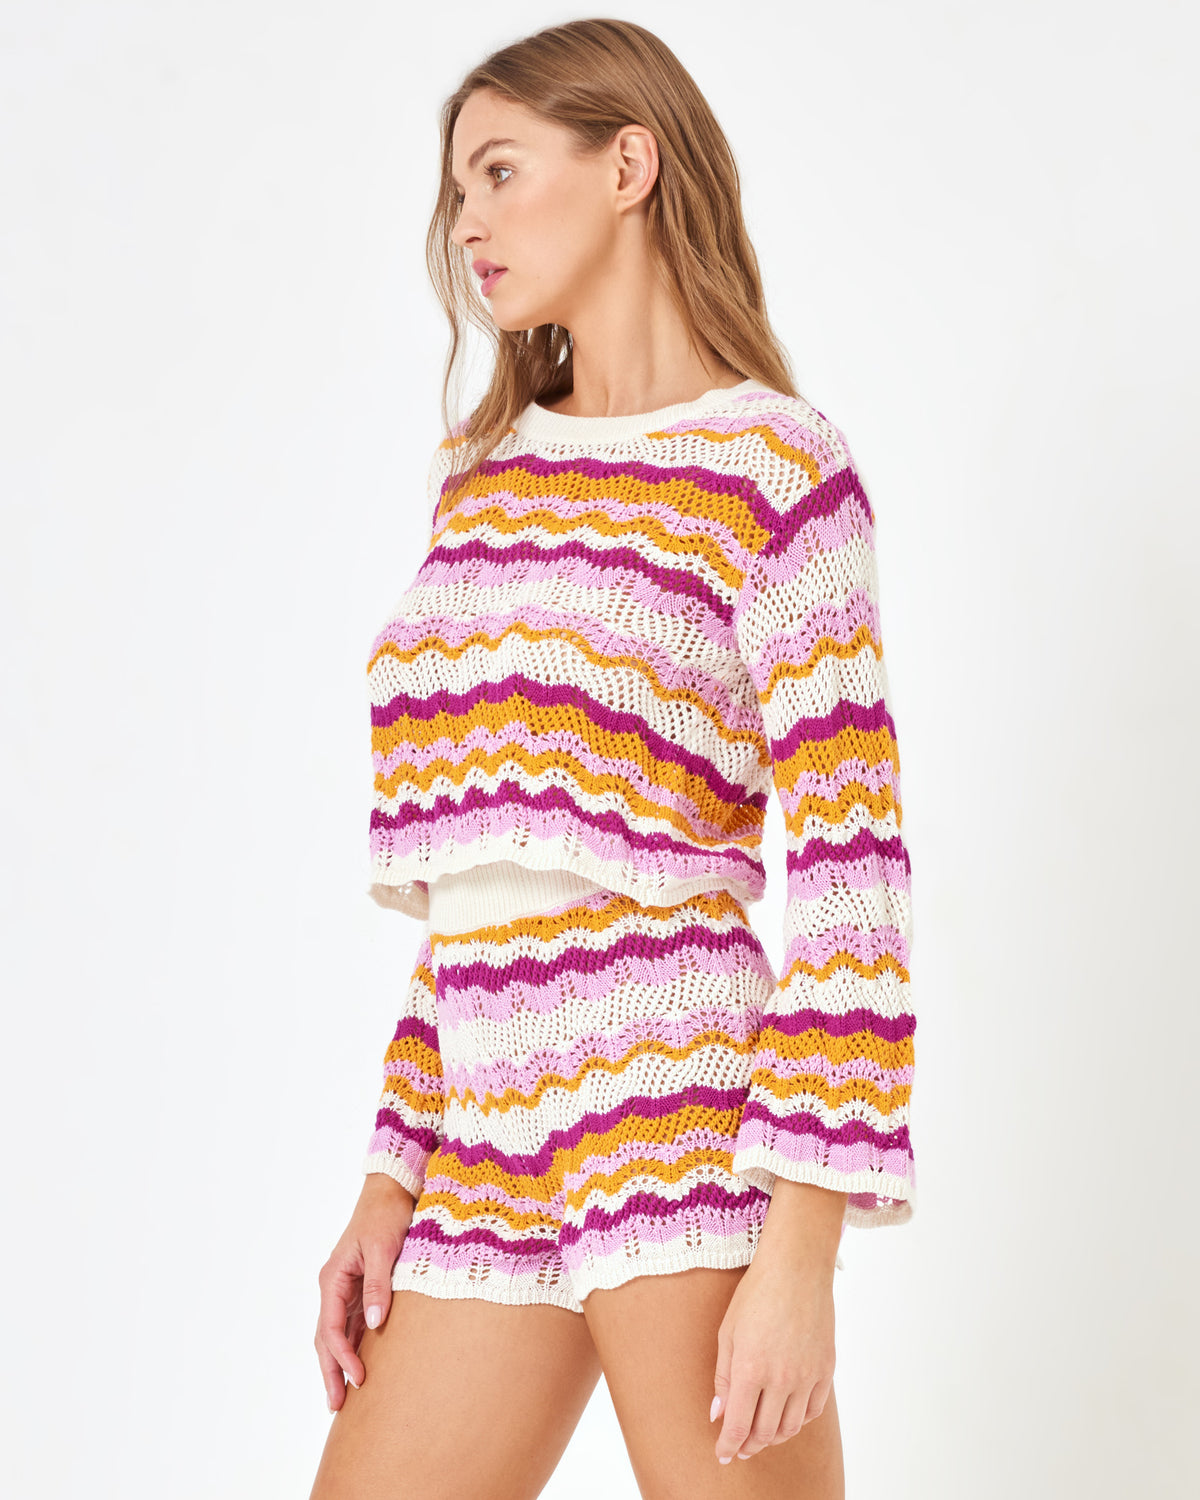 LSPACE x Revolve Sun Ray Sweater Summer Is Sweet | Model: Daria (size: S)